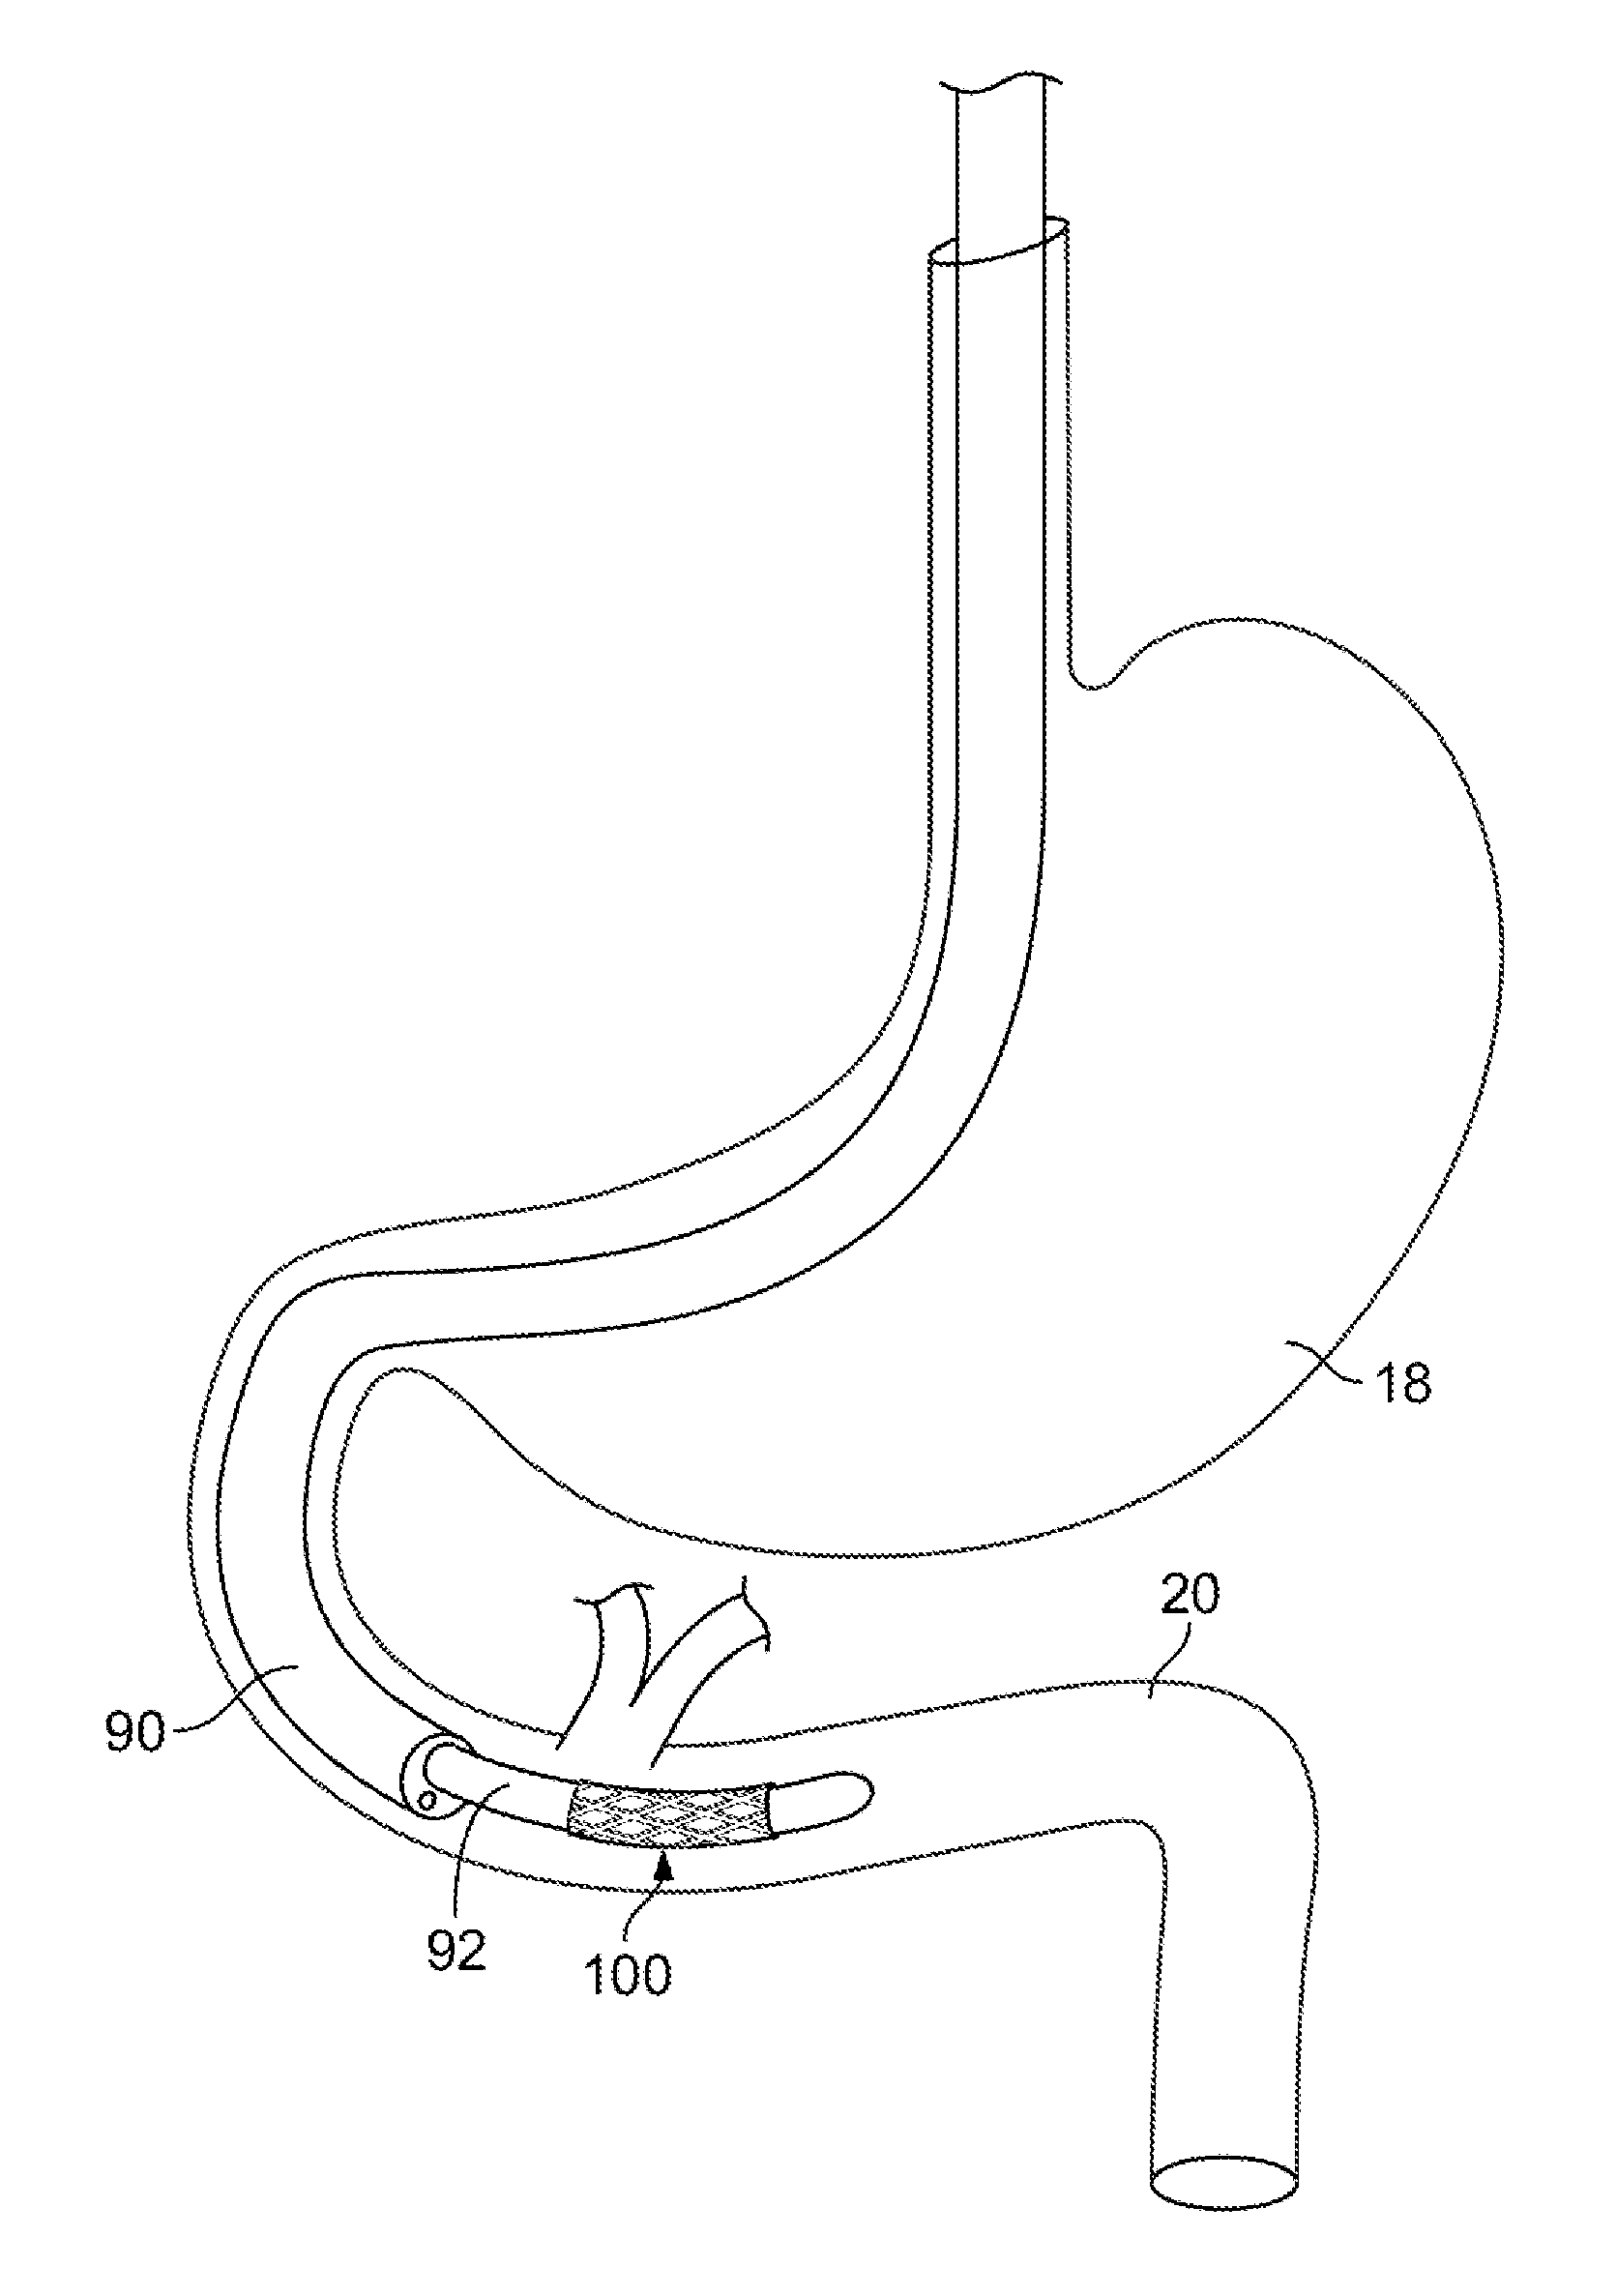 Gastrointestinal implant and methods for use